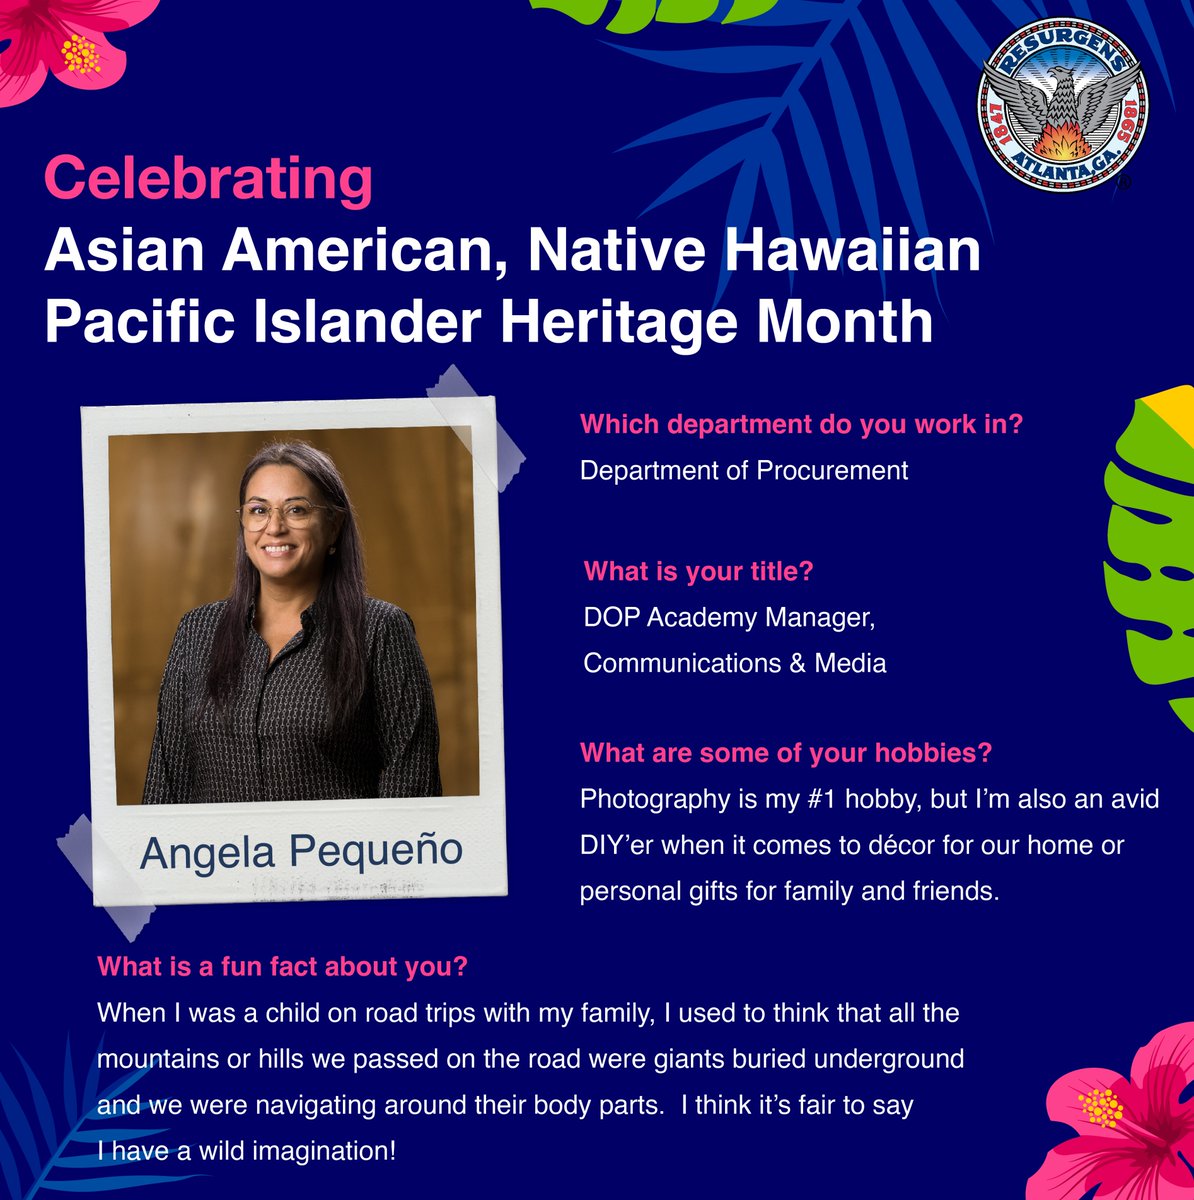 We continue to honor Asian American and Pacific Islander Heritage Month by featuring our exceptional employees! Stay tuned for more inspiring showcases highlighting their talents and contributions throughout the remainder of this month.